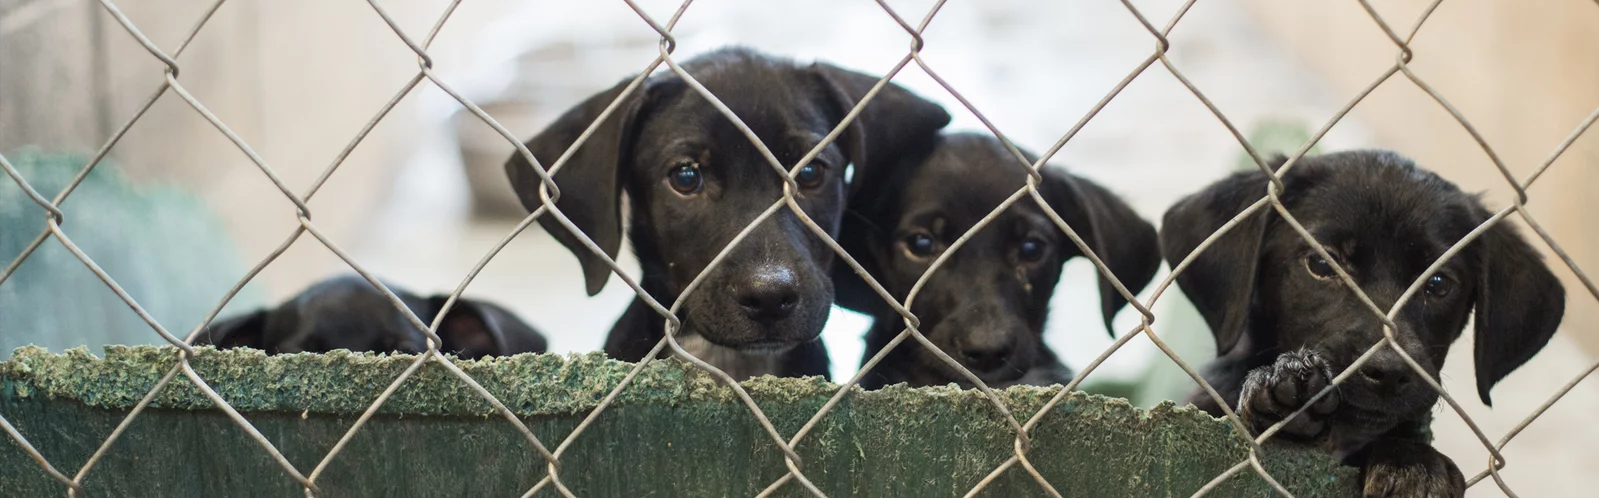 Black puppies waiting for adoption in a shelter